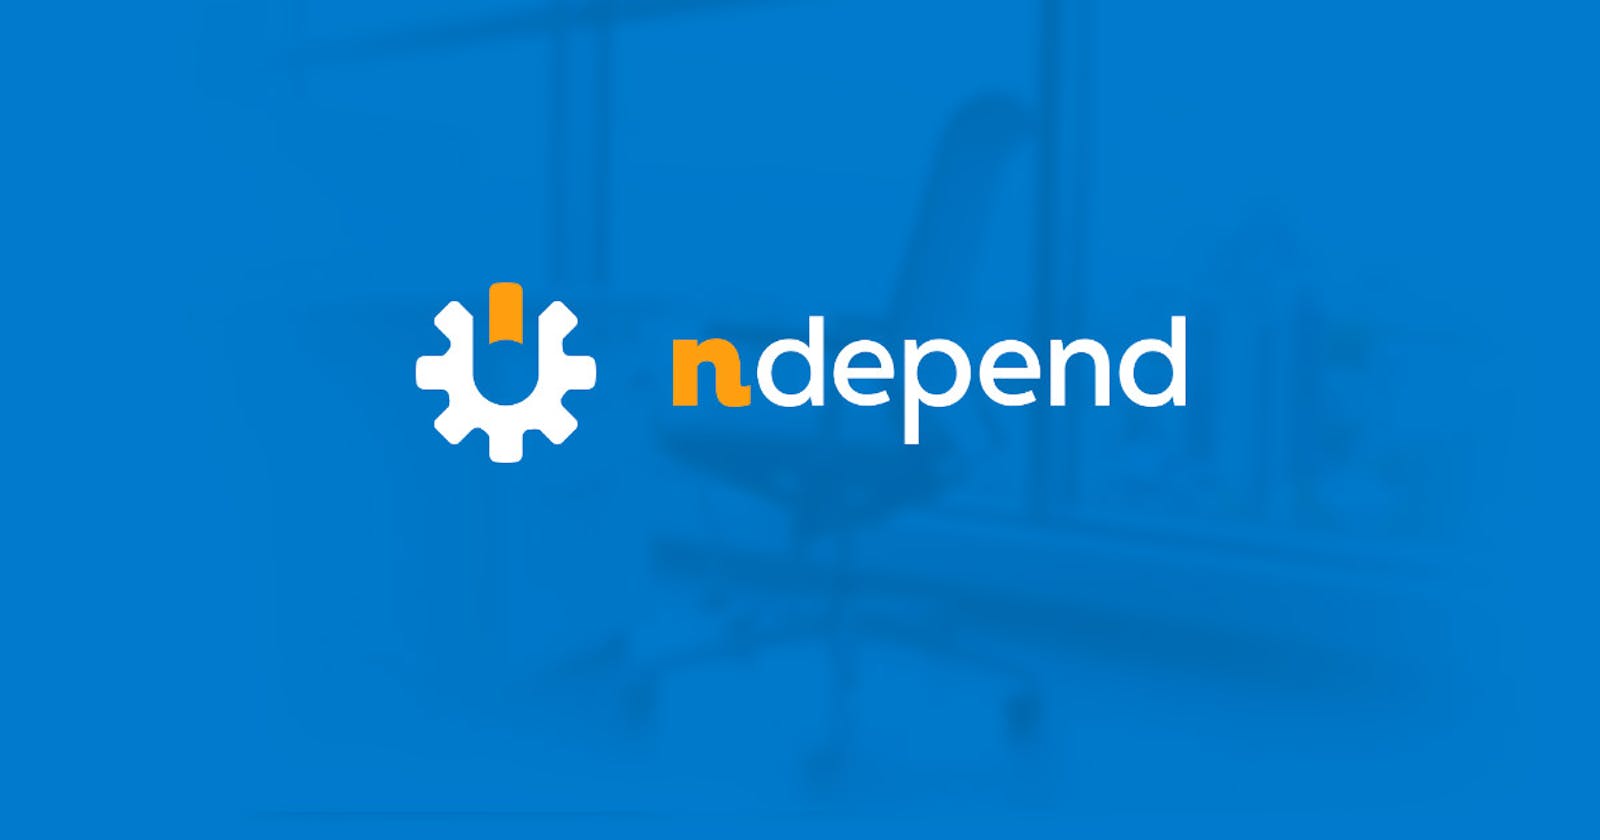 NDepend: introduction